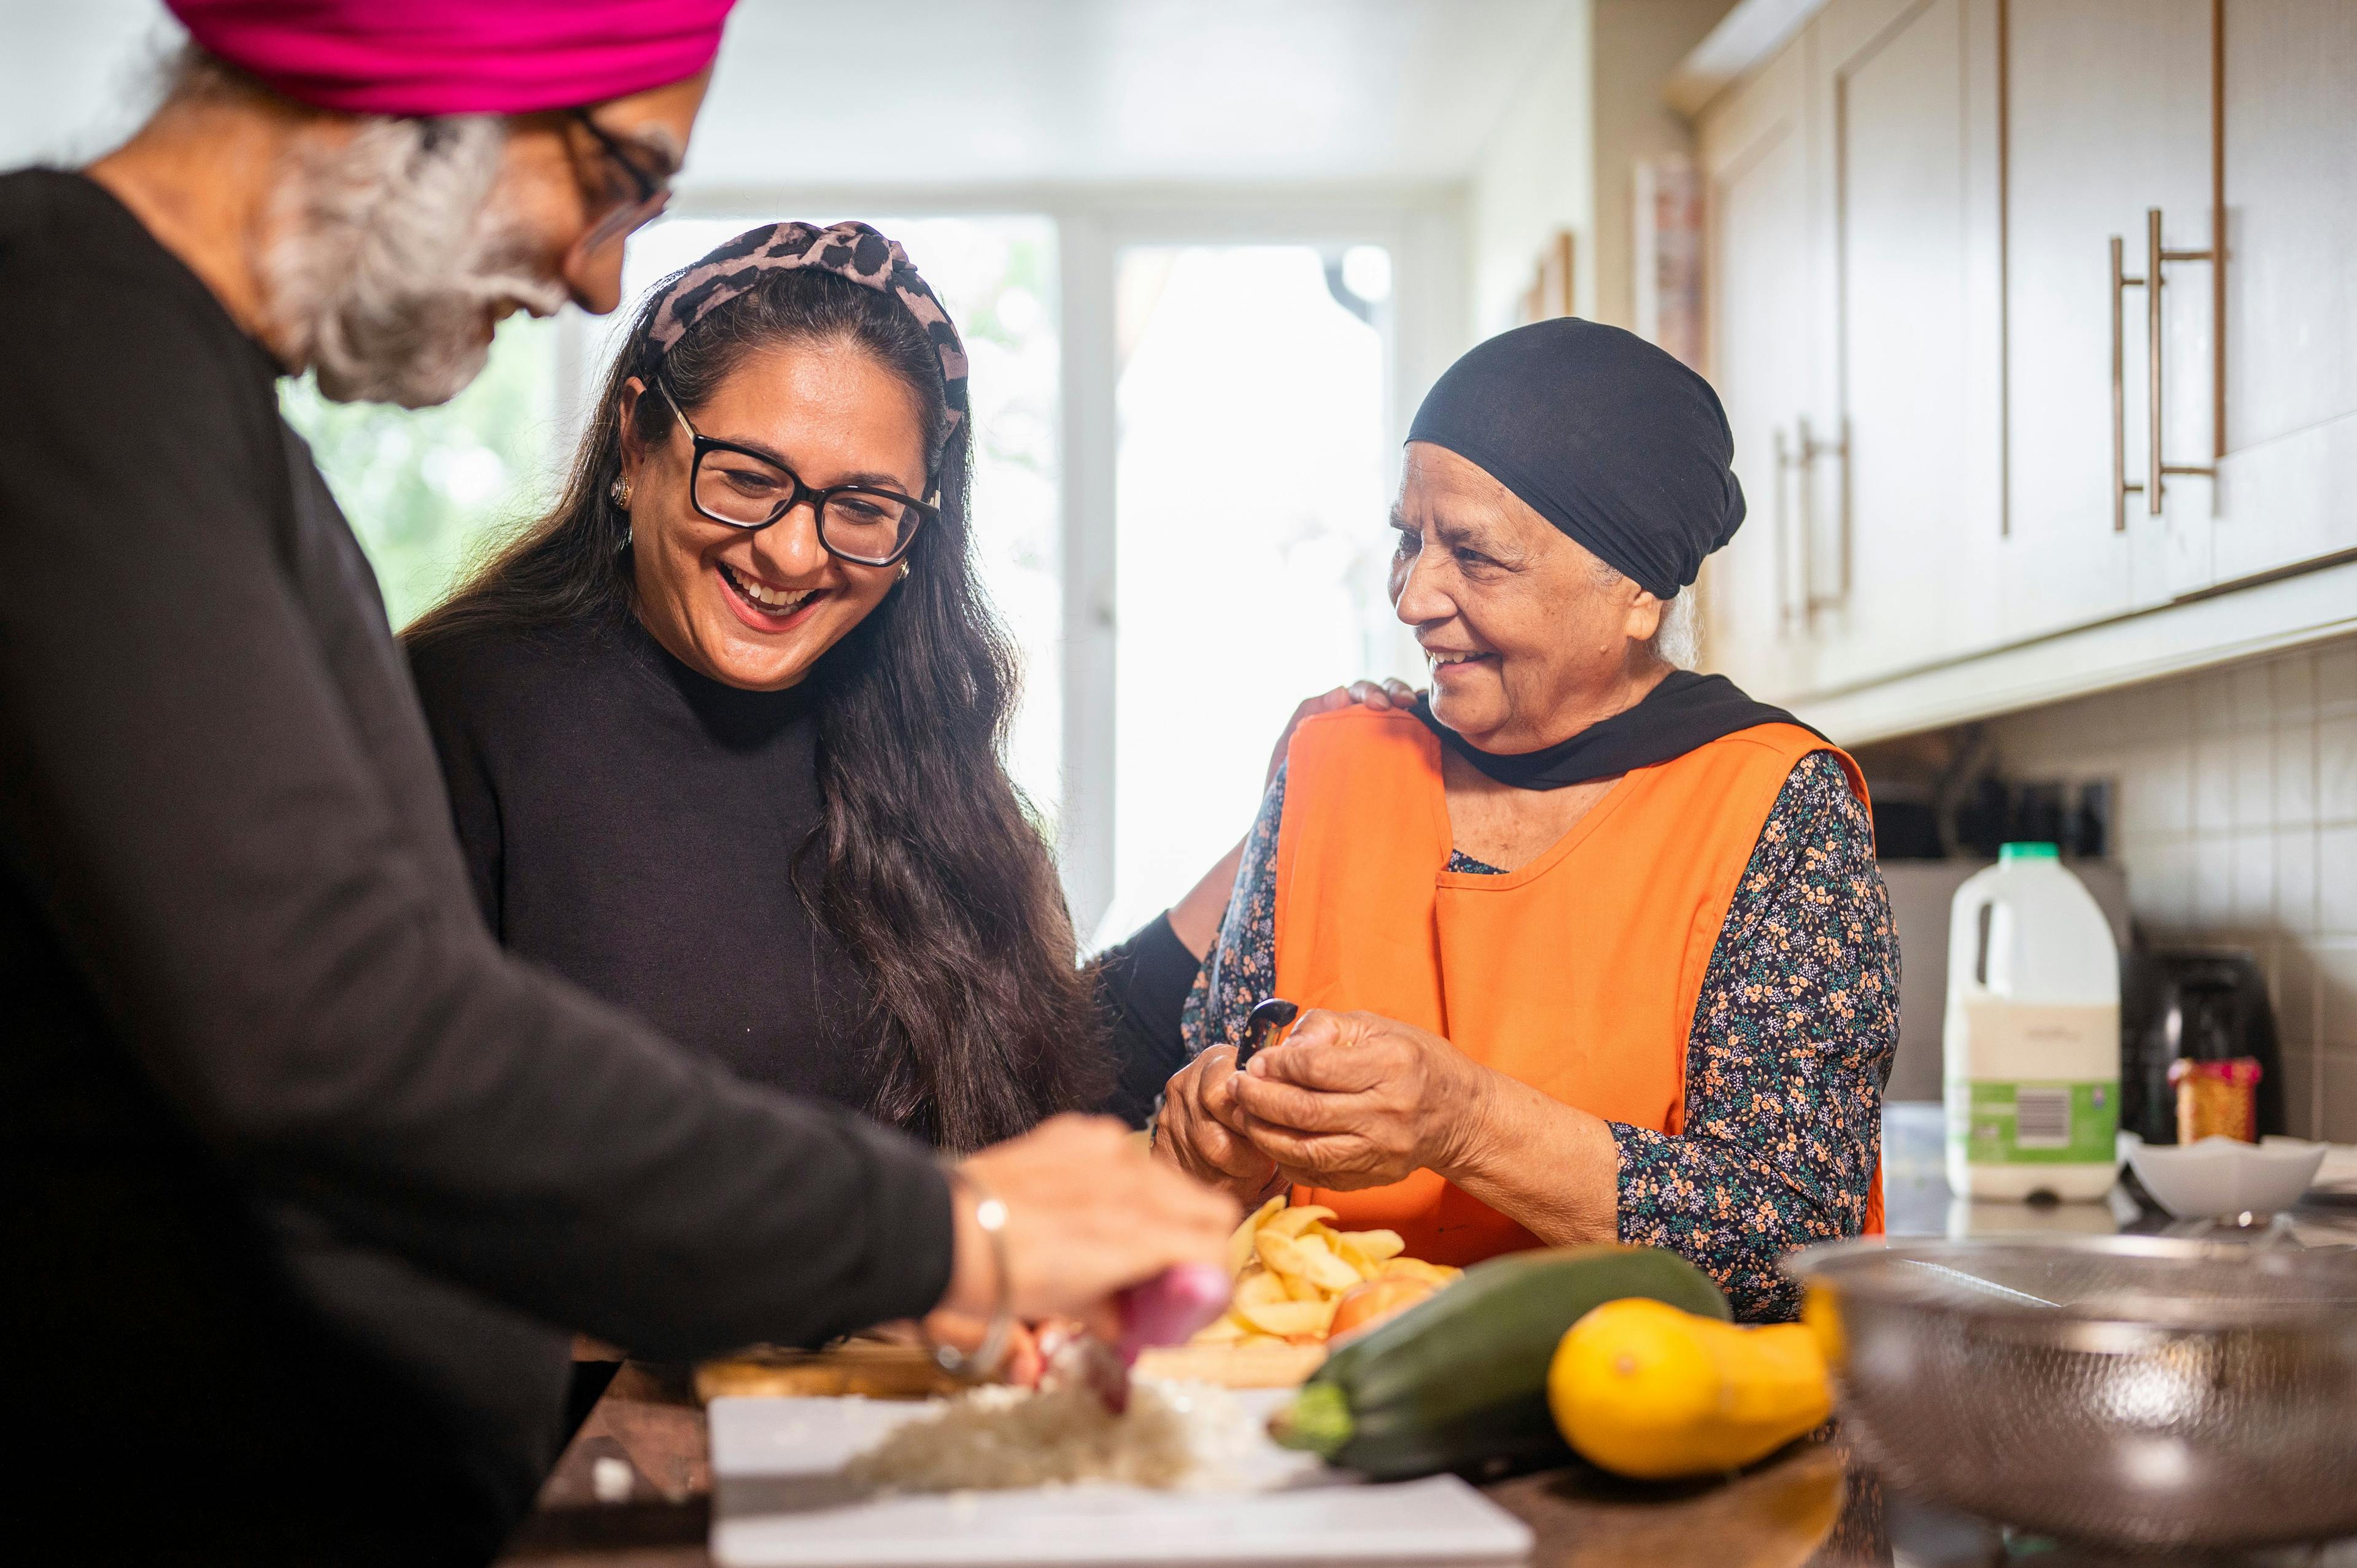 Woman helping elderly couple with their food and nutrition